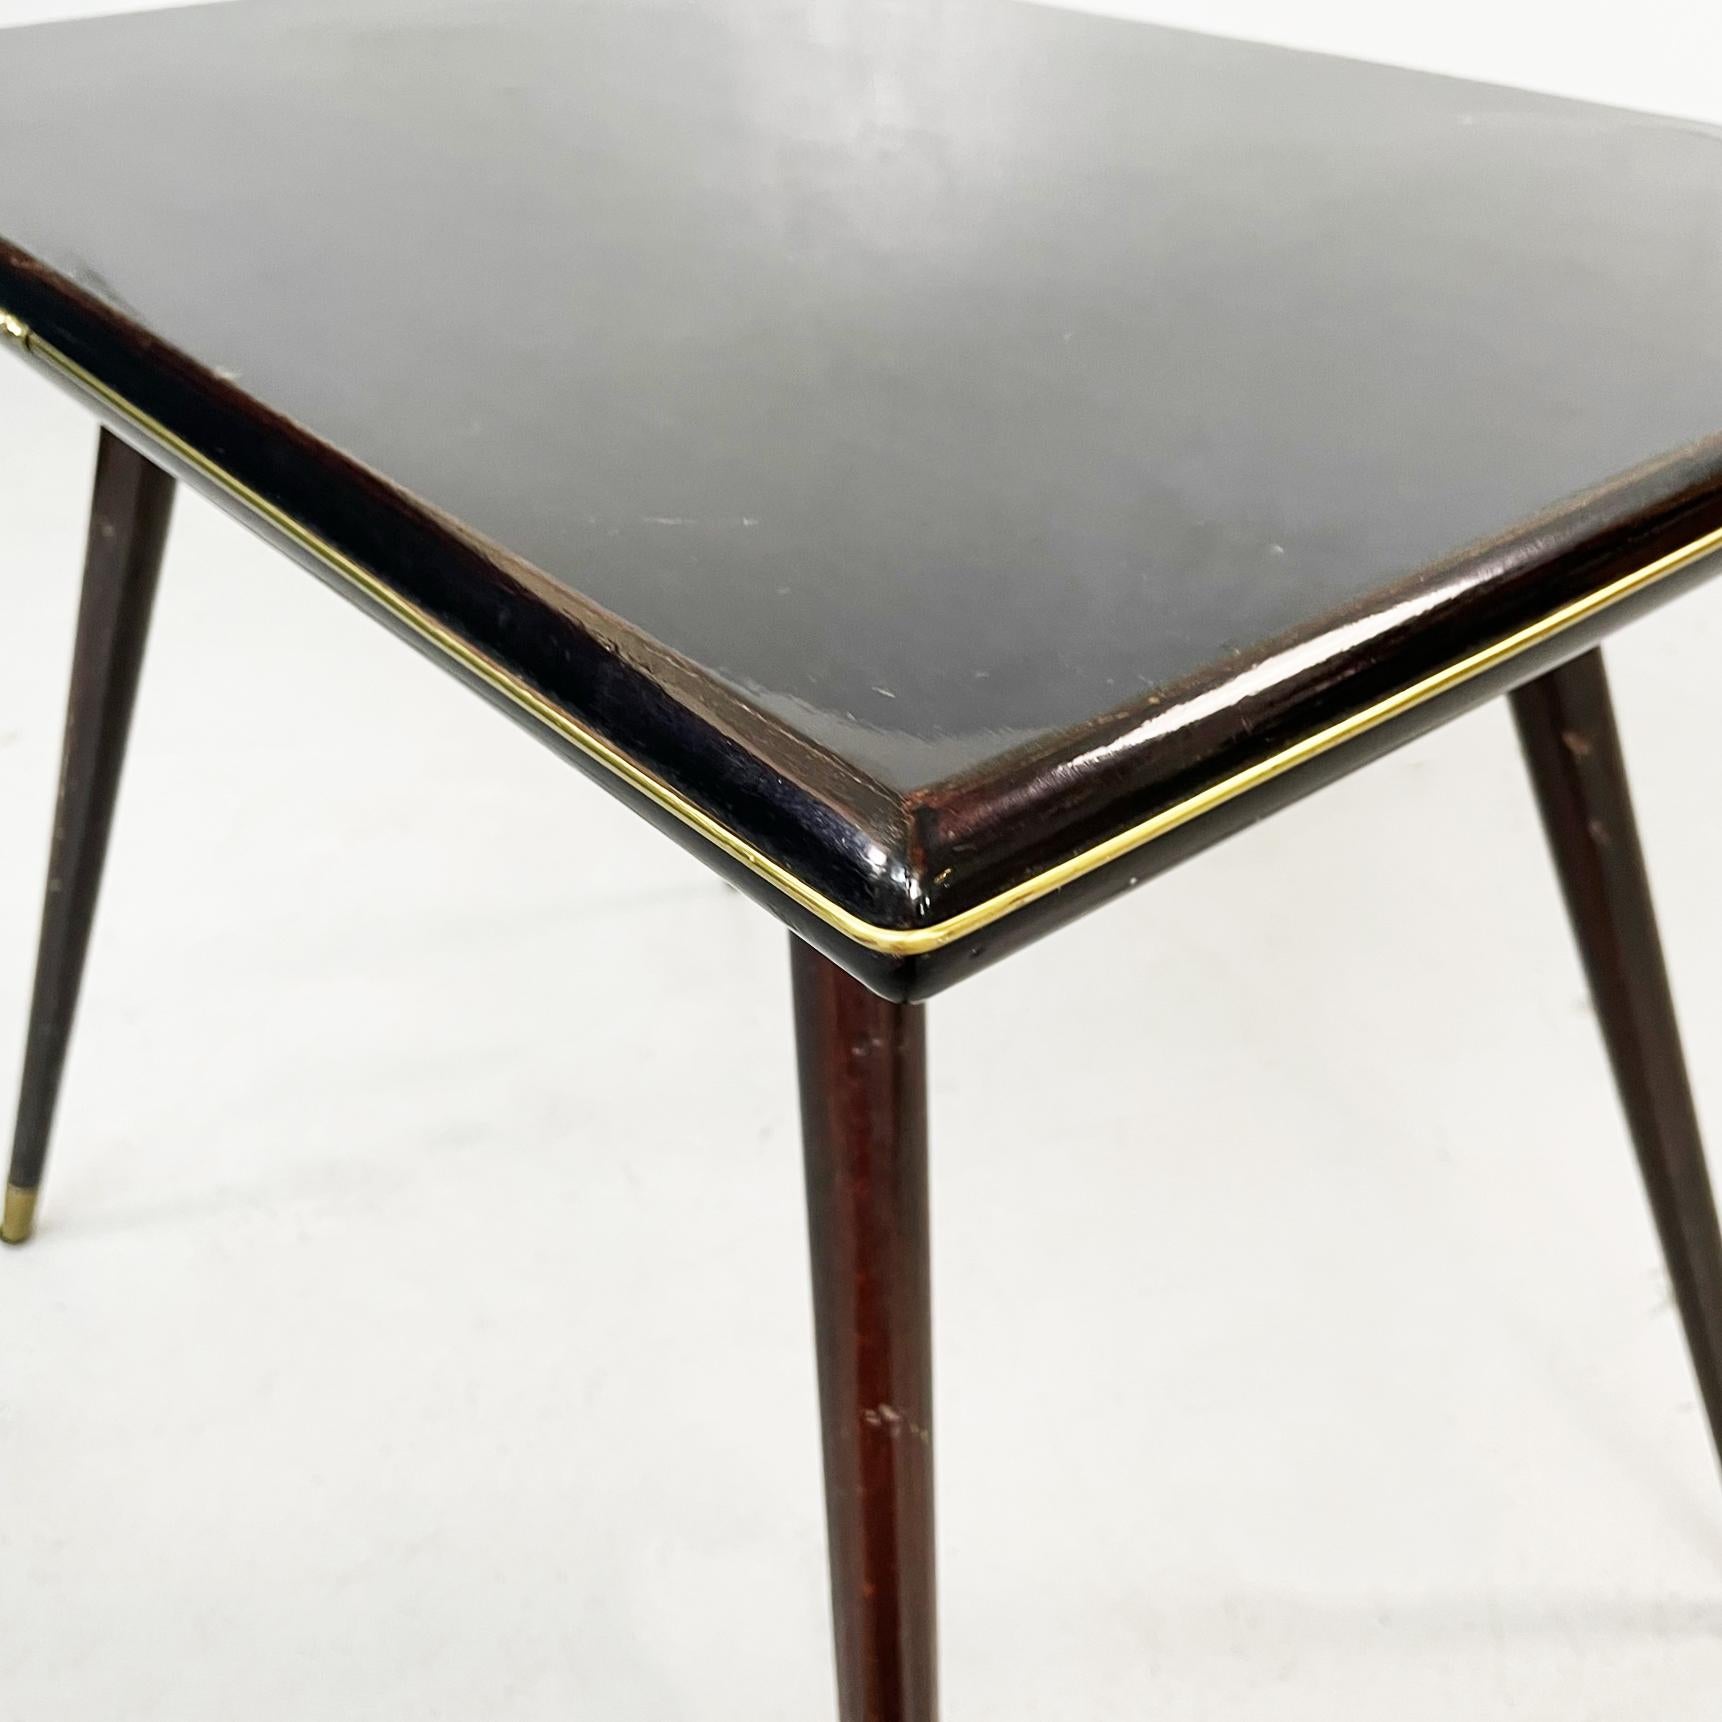 Italian Mid-Century Modern Rectangular Coffee Table in Wood and Brass, 1950s For Sale 2